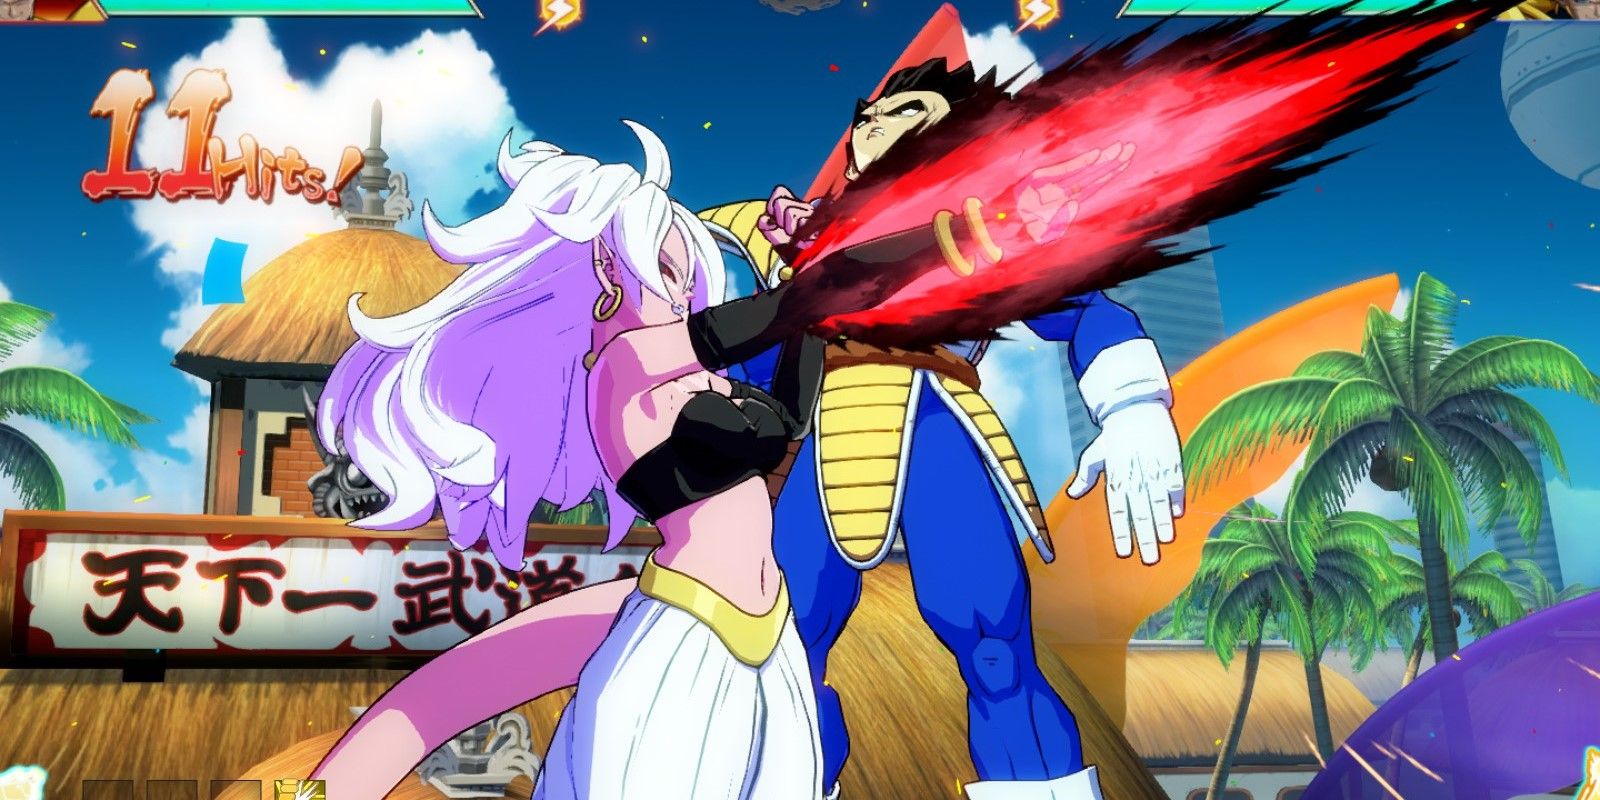 Dragon Ball Android 21 using Connoisseur Cut on Base Vegeta